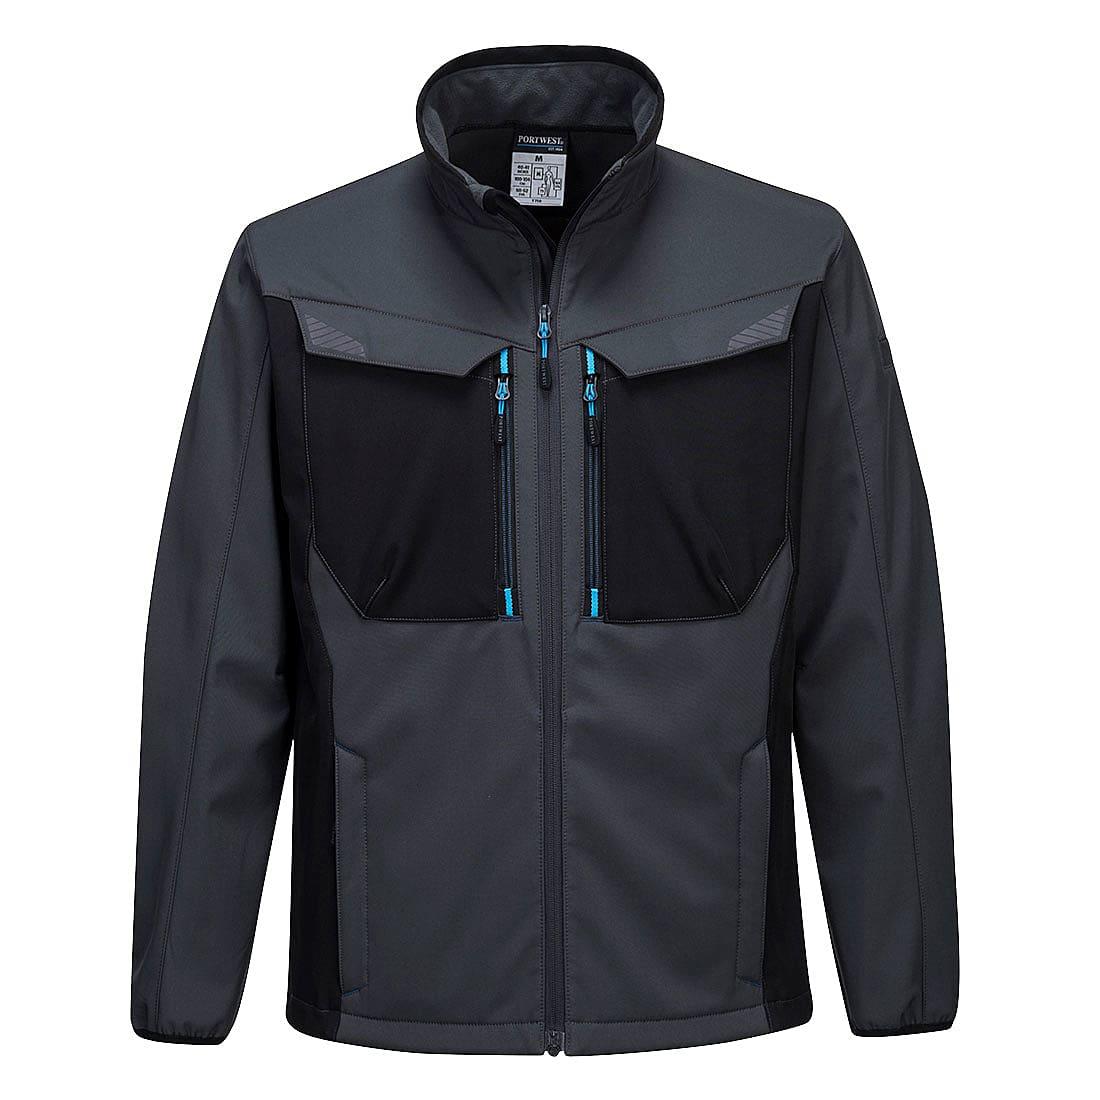 Portwest WX3 Softshell Jacket in Metal Grey (Product Code: T750)